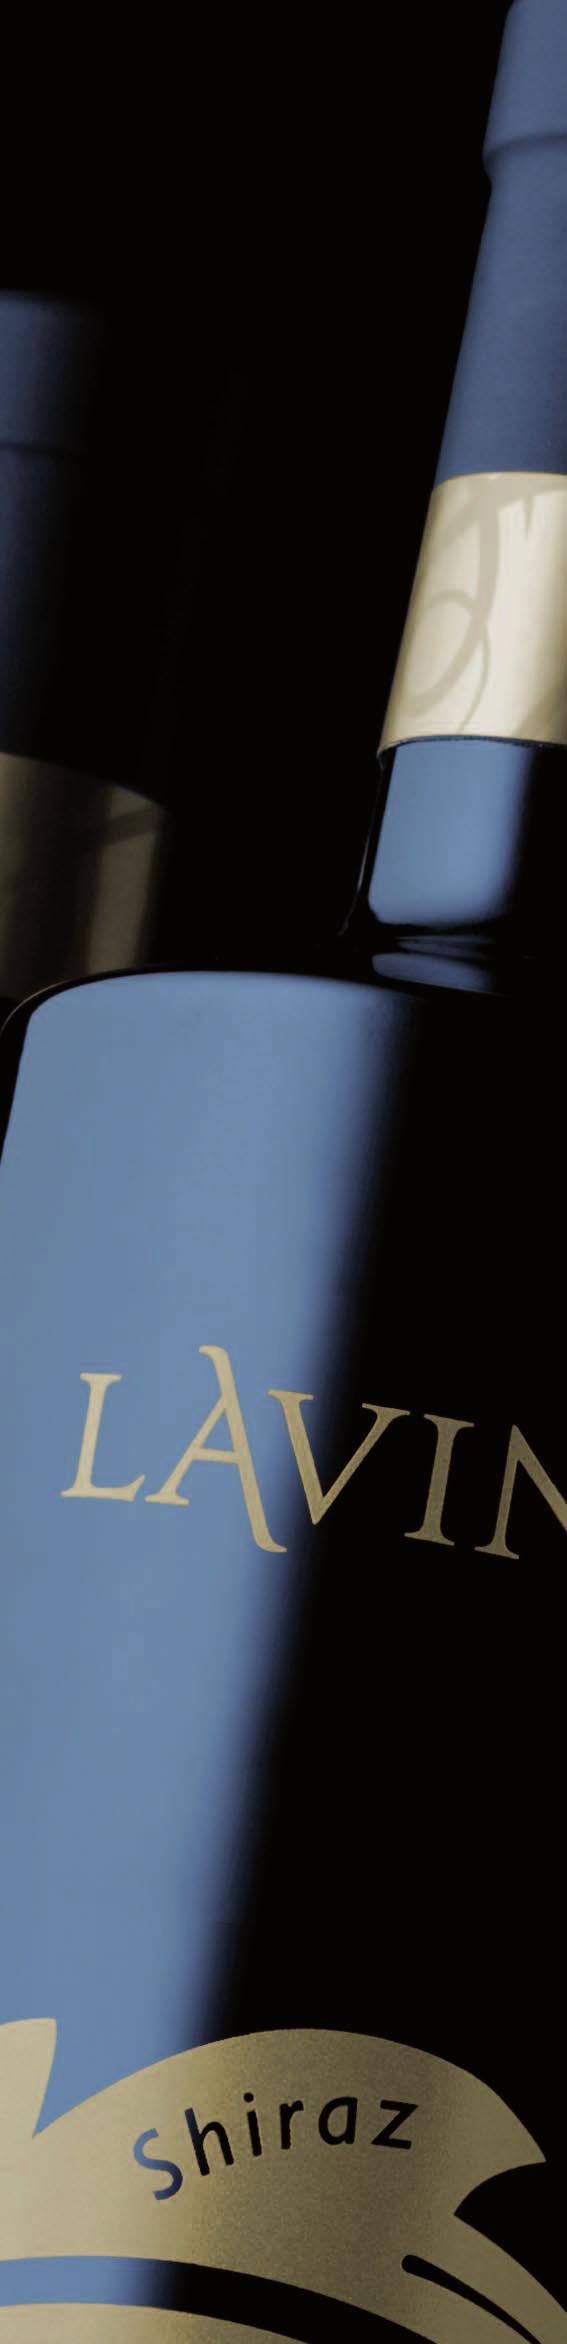 OUR WINE THE AURUM RELEASE a hidden element The Aurum Release is a combination of texture, rarity and elegance.